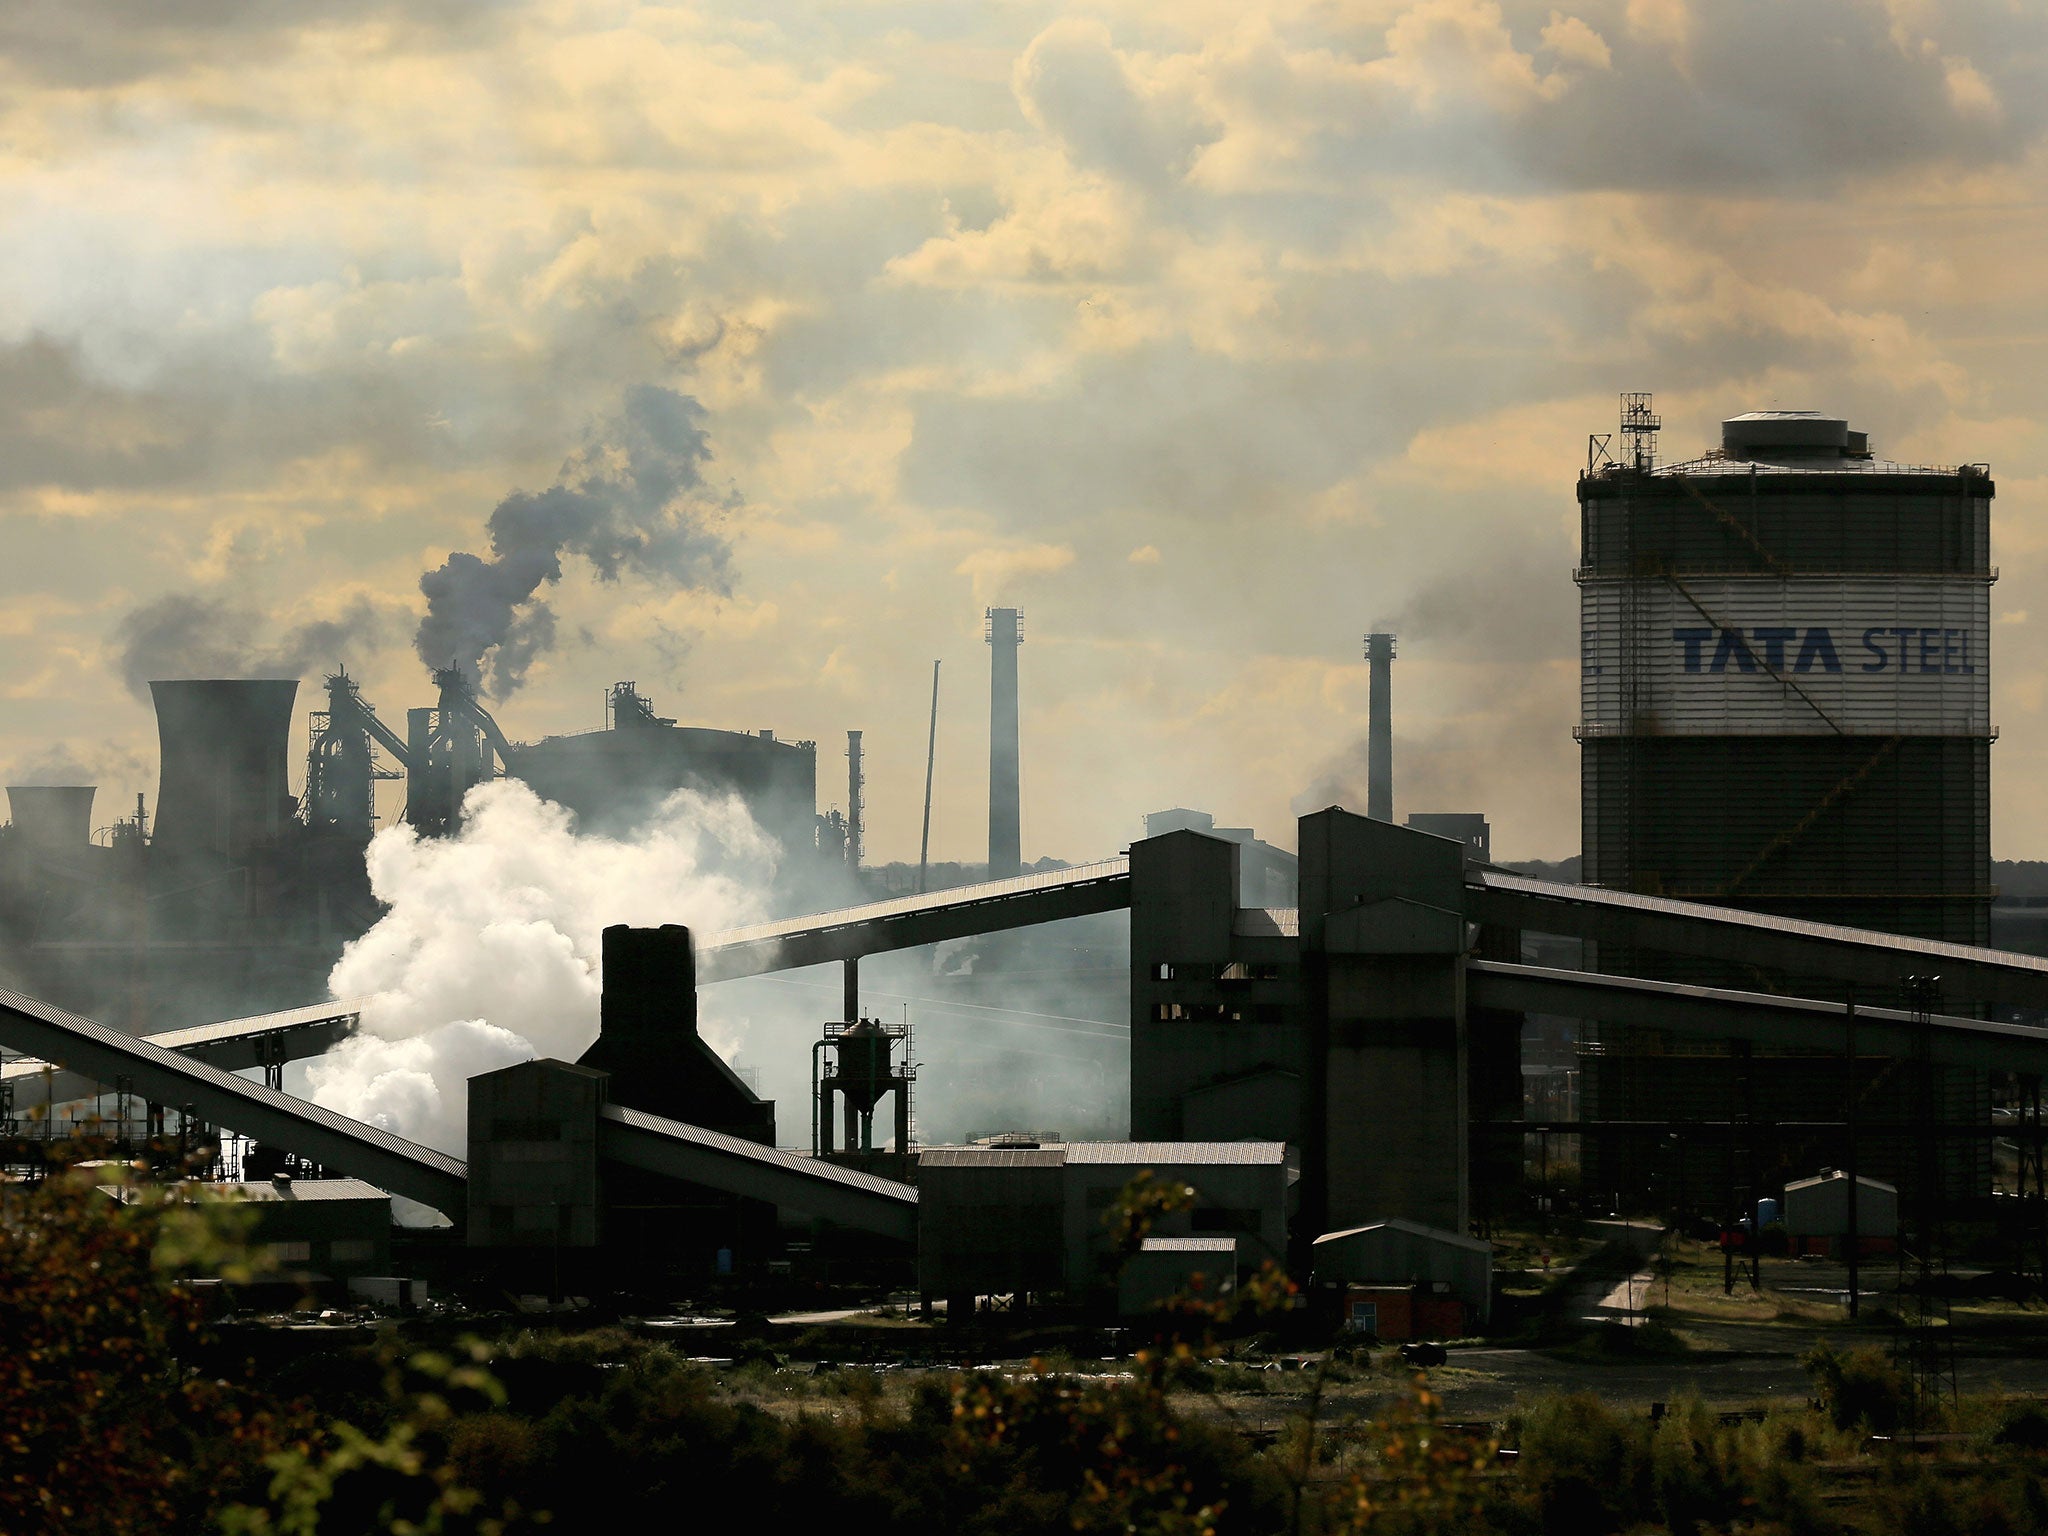 Greybull will take on the entirety of Tata Steel UK's steelworks operations in Scunthorpe